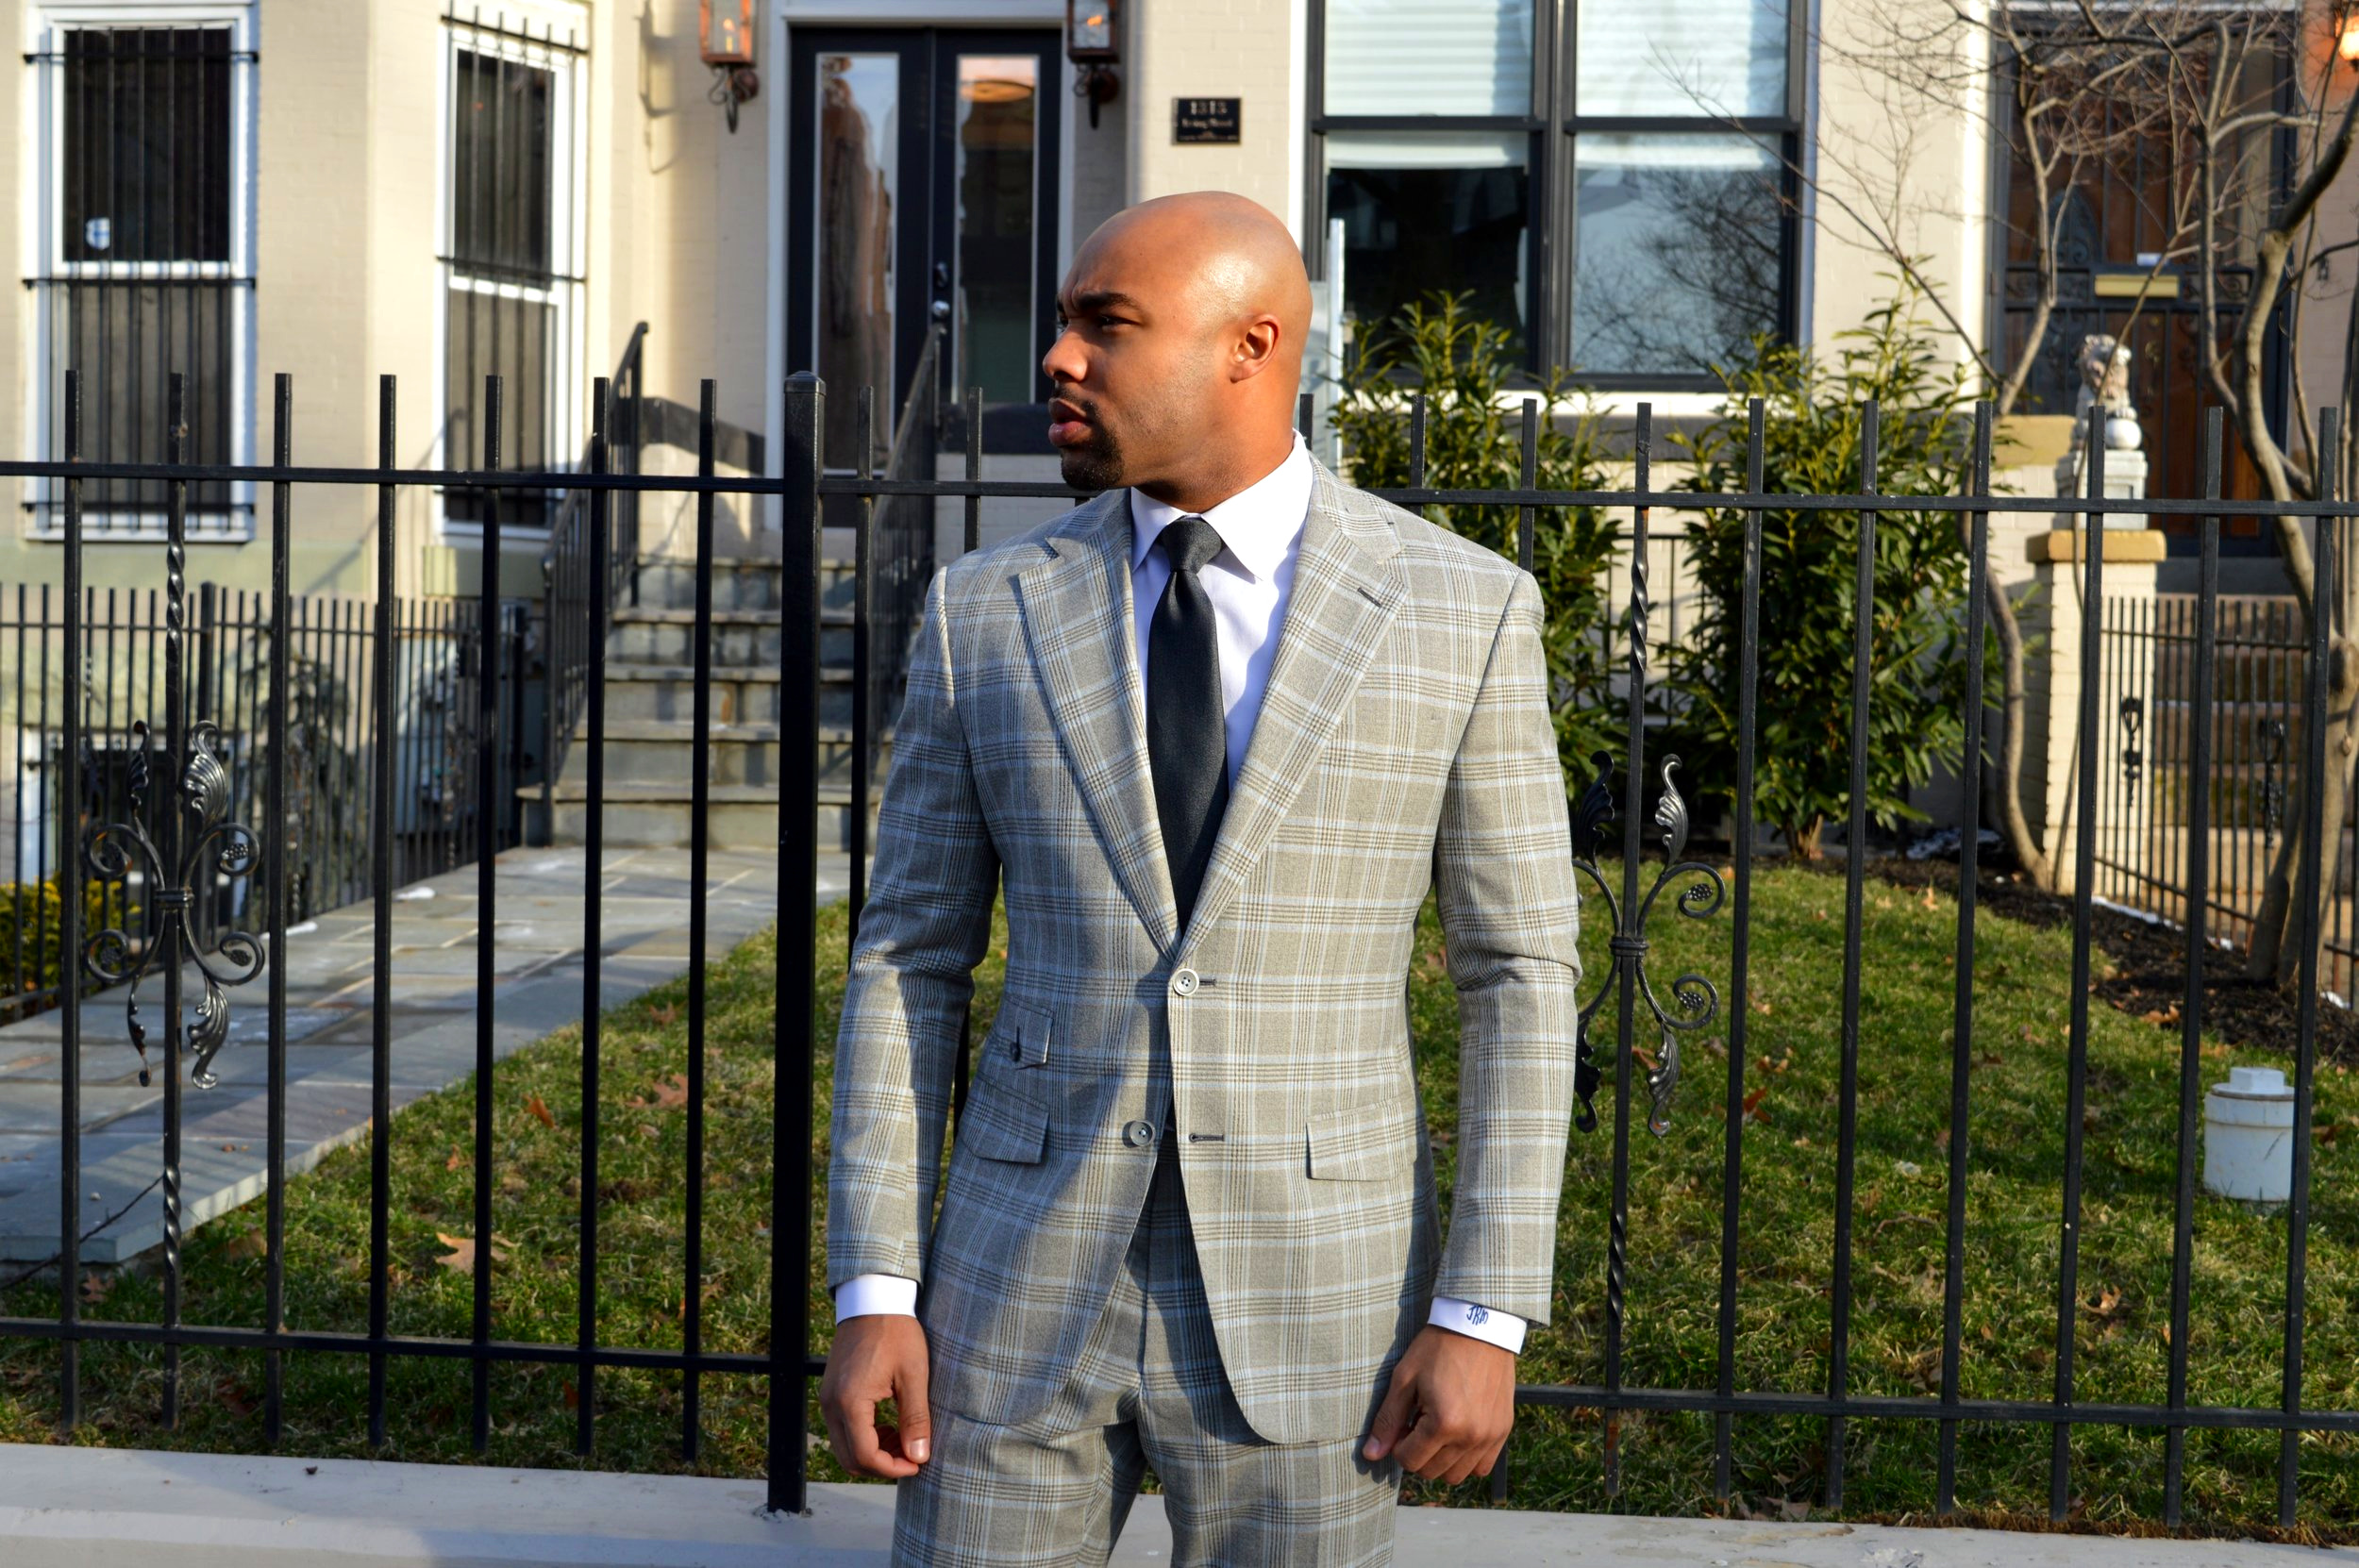  Custom Fit・Style・Service   Tailored suits and shirts designed to fit you; not the rack.     SCHEDULE A FITTING   